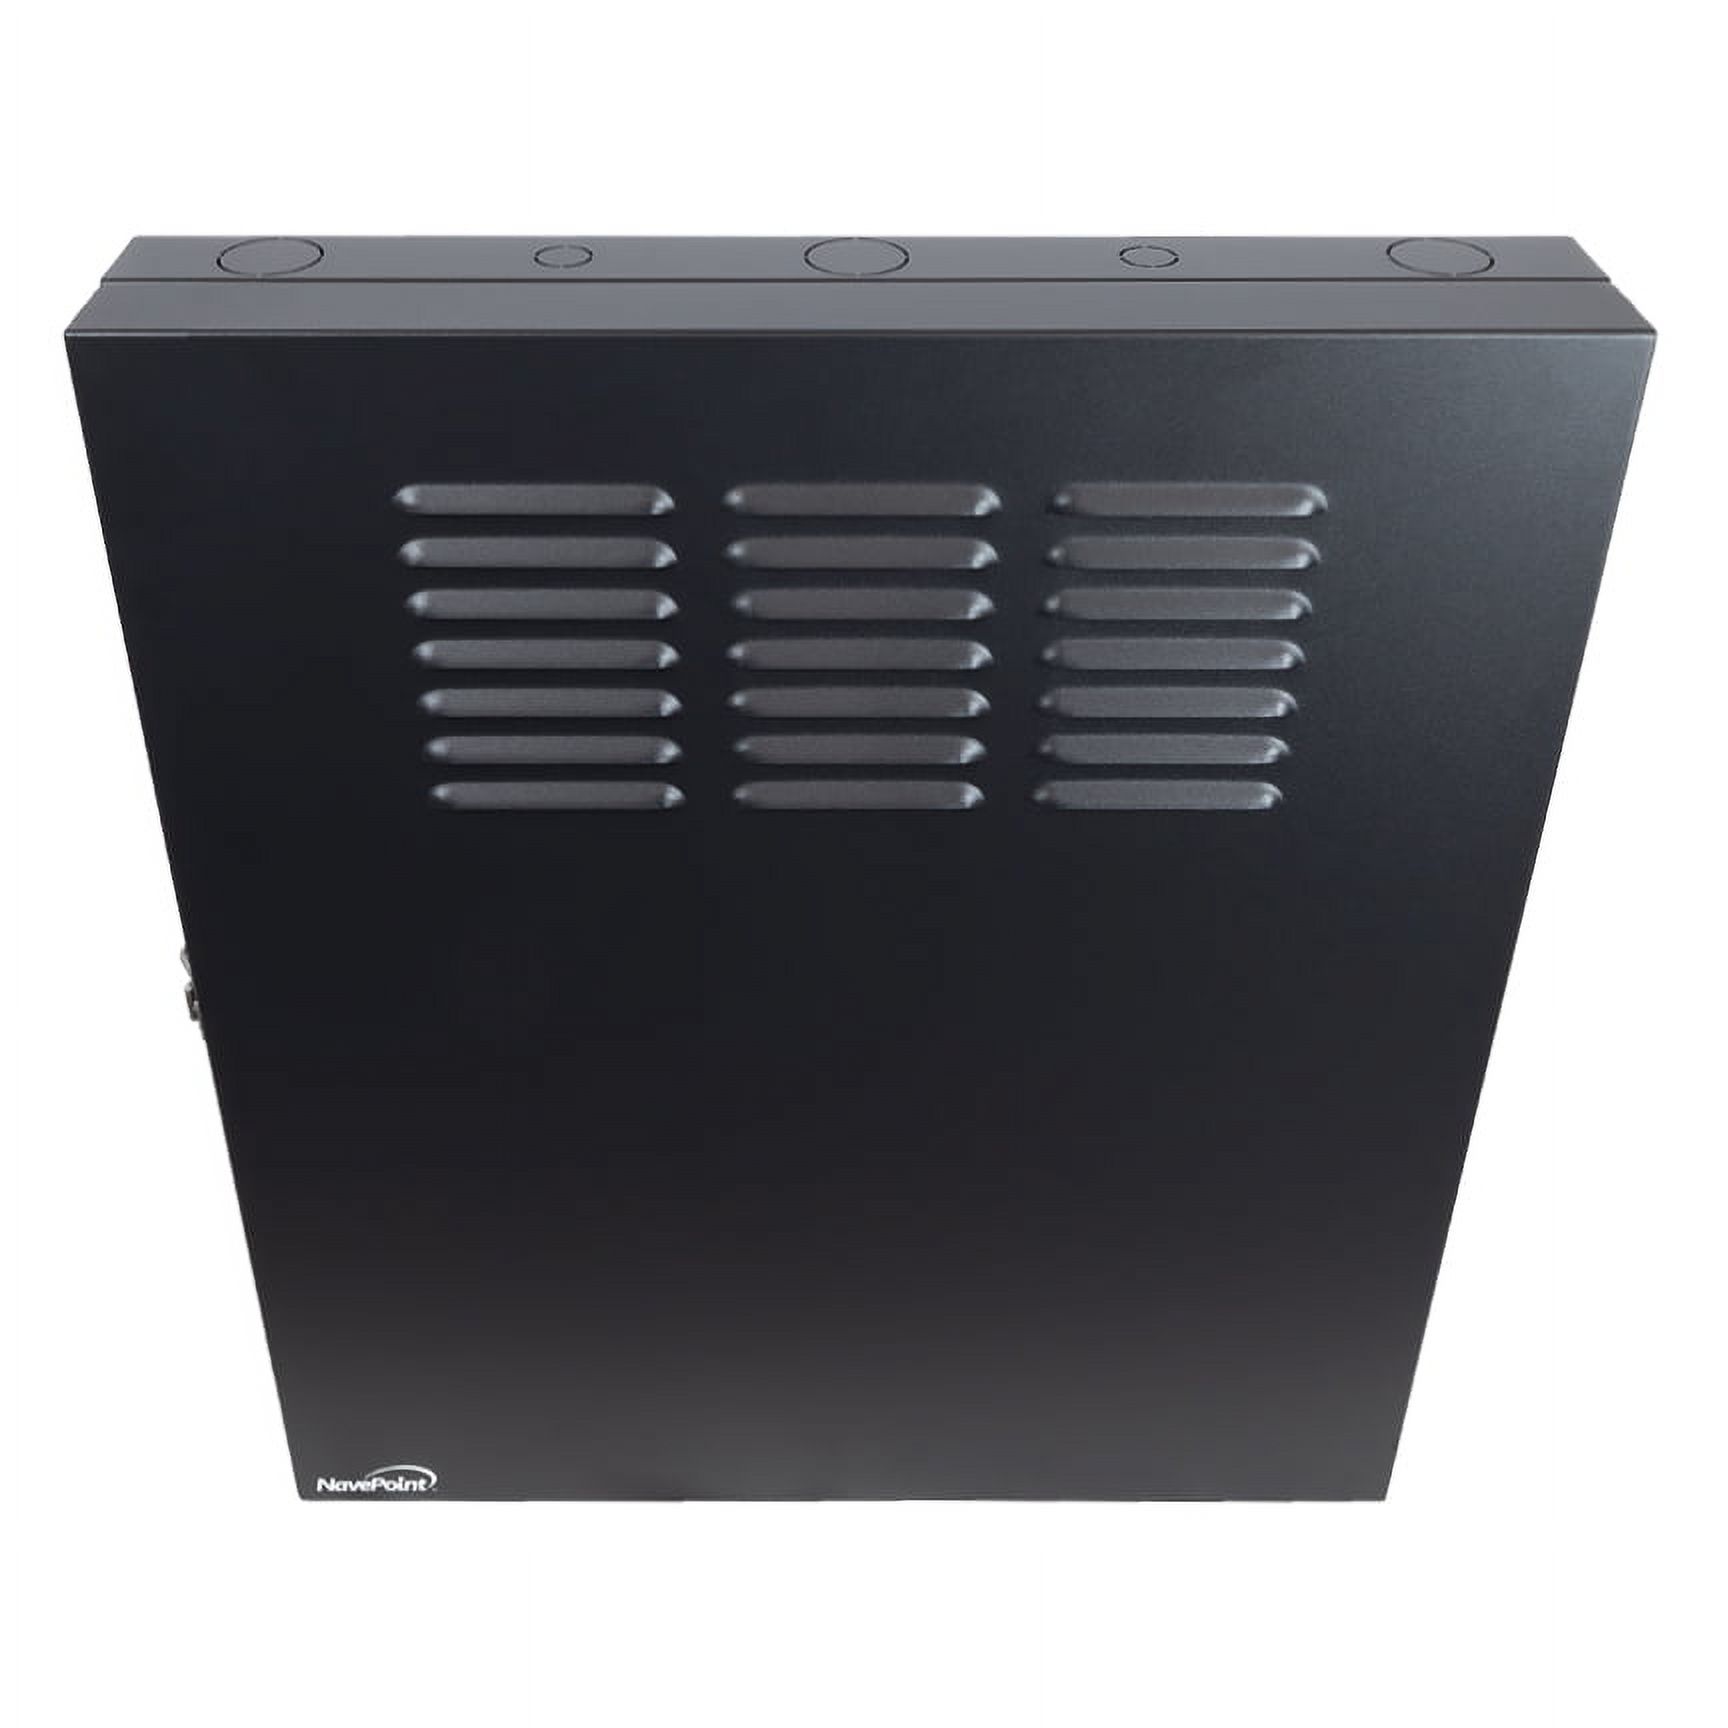 NavePoint 2U Vertical Wall Mount Enclosure for 19" Networking Equipment, Servers, Switch and Patch Panels, Low Profile, 20" Depths, Max Weight Capacity 150 Lbs - image 2 of 6